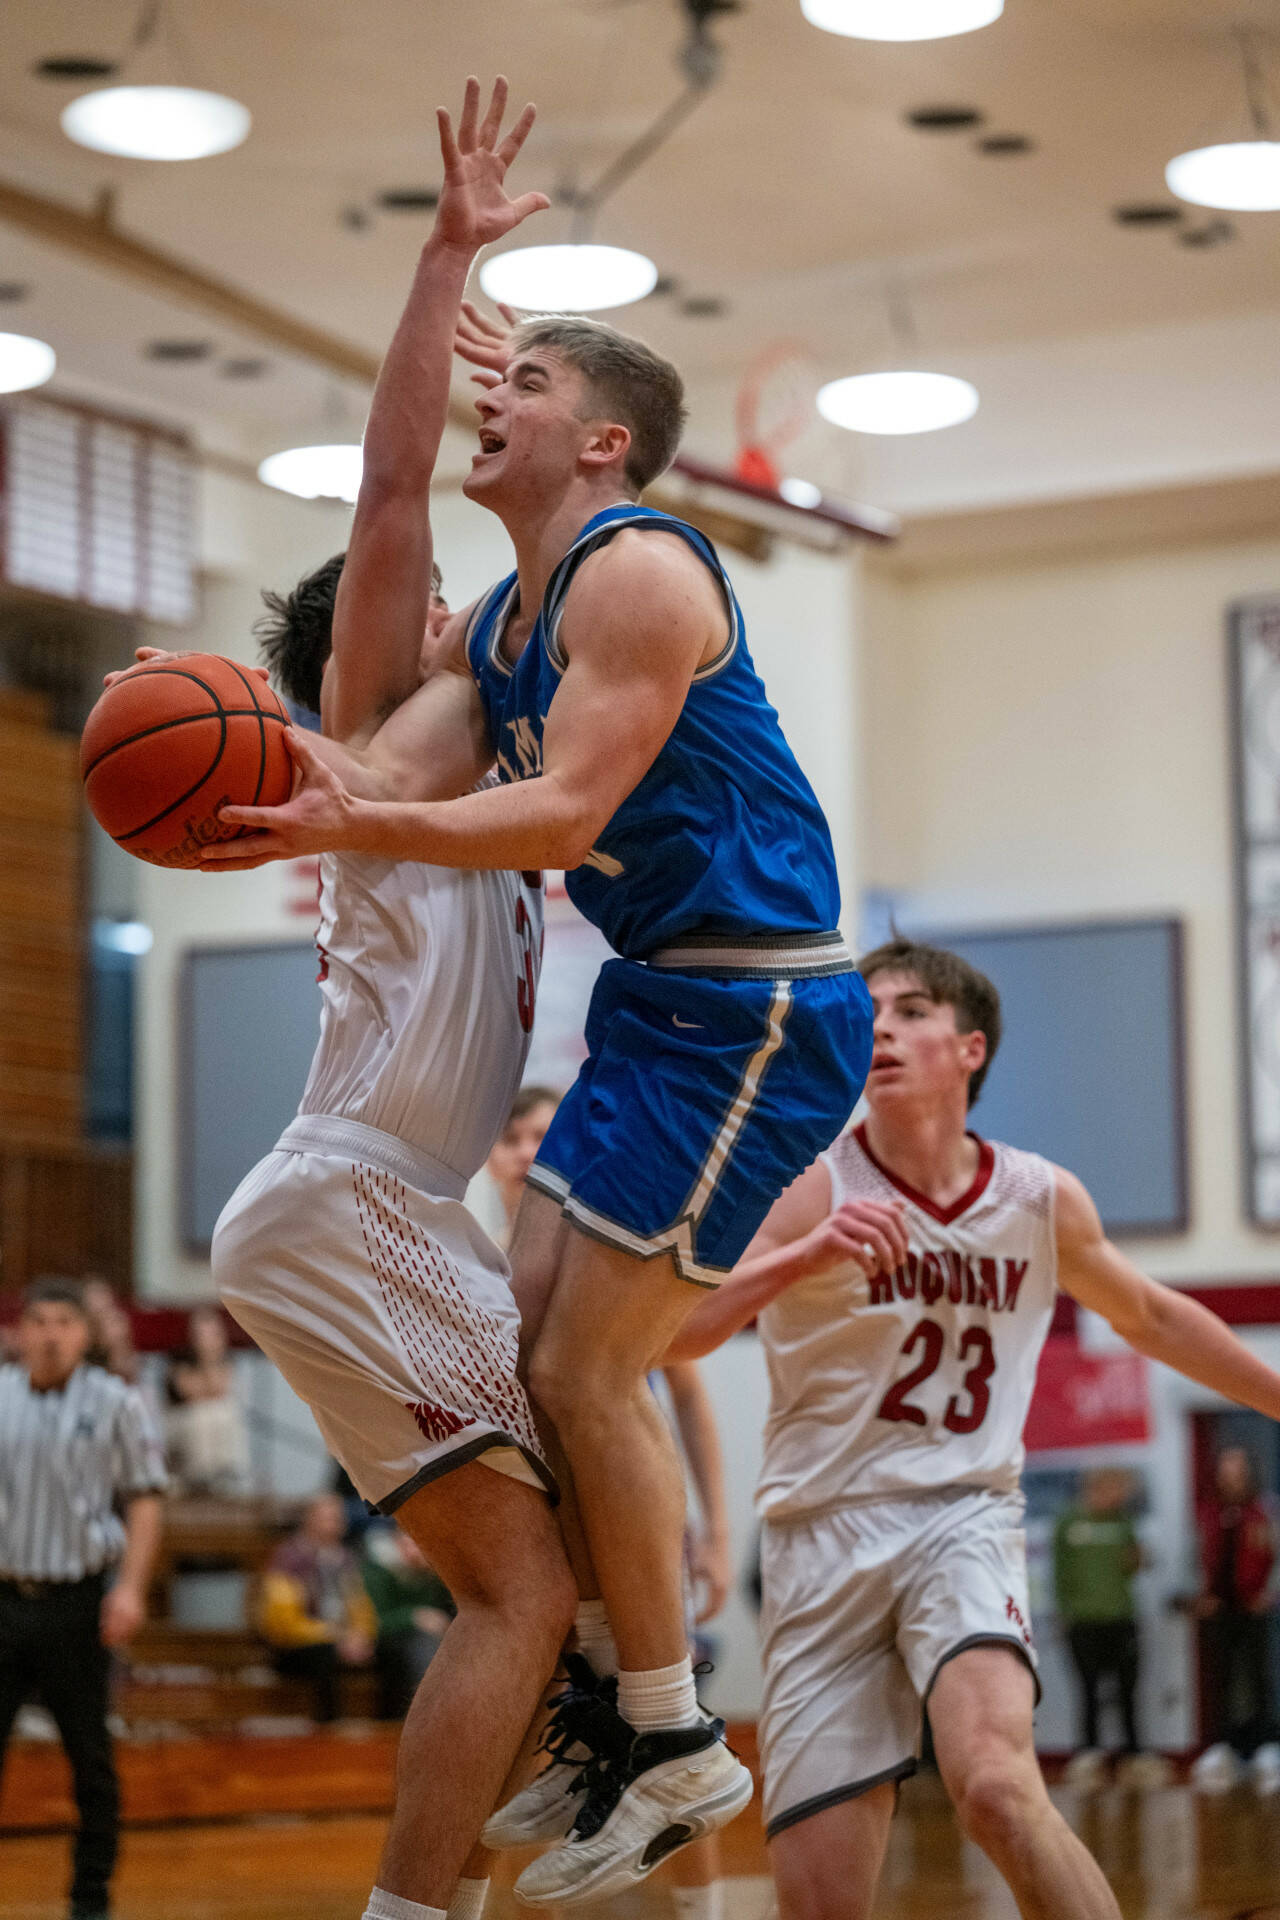 PHOTO BY FOREST WORGUM Elma’s Traden Carter, right, goes up for a shot against Hoquiam’s Aiden Butcher during the Eagles’ 49-47 win on Tuesday at Hoquiam Square Garden.